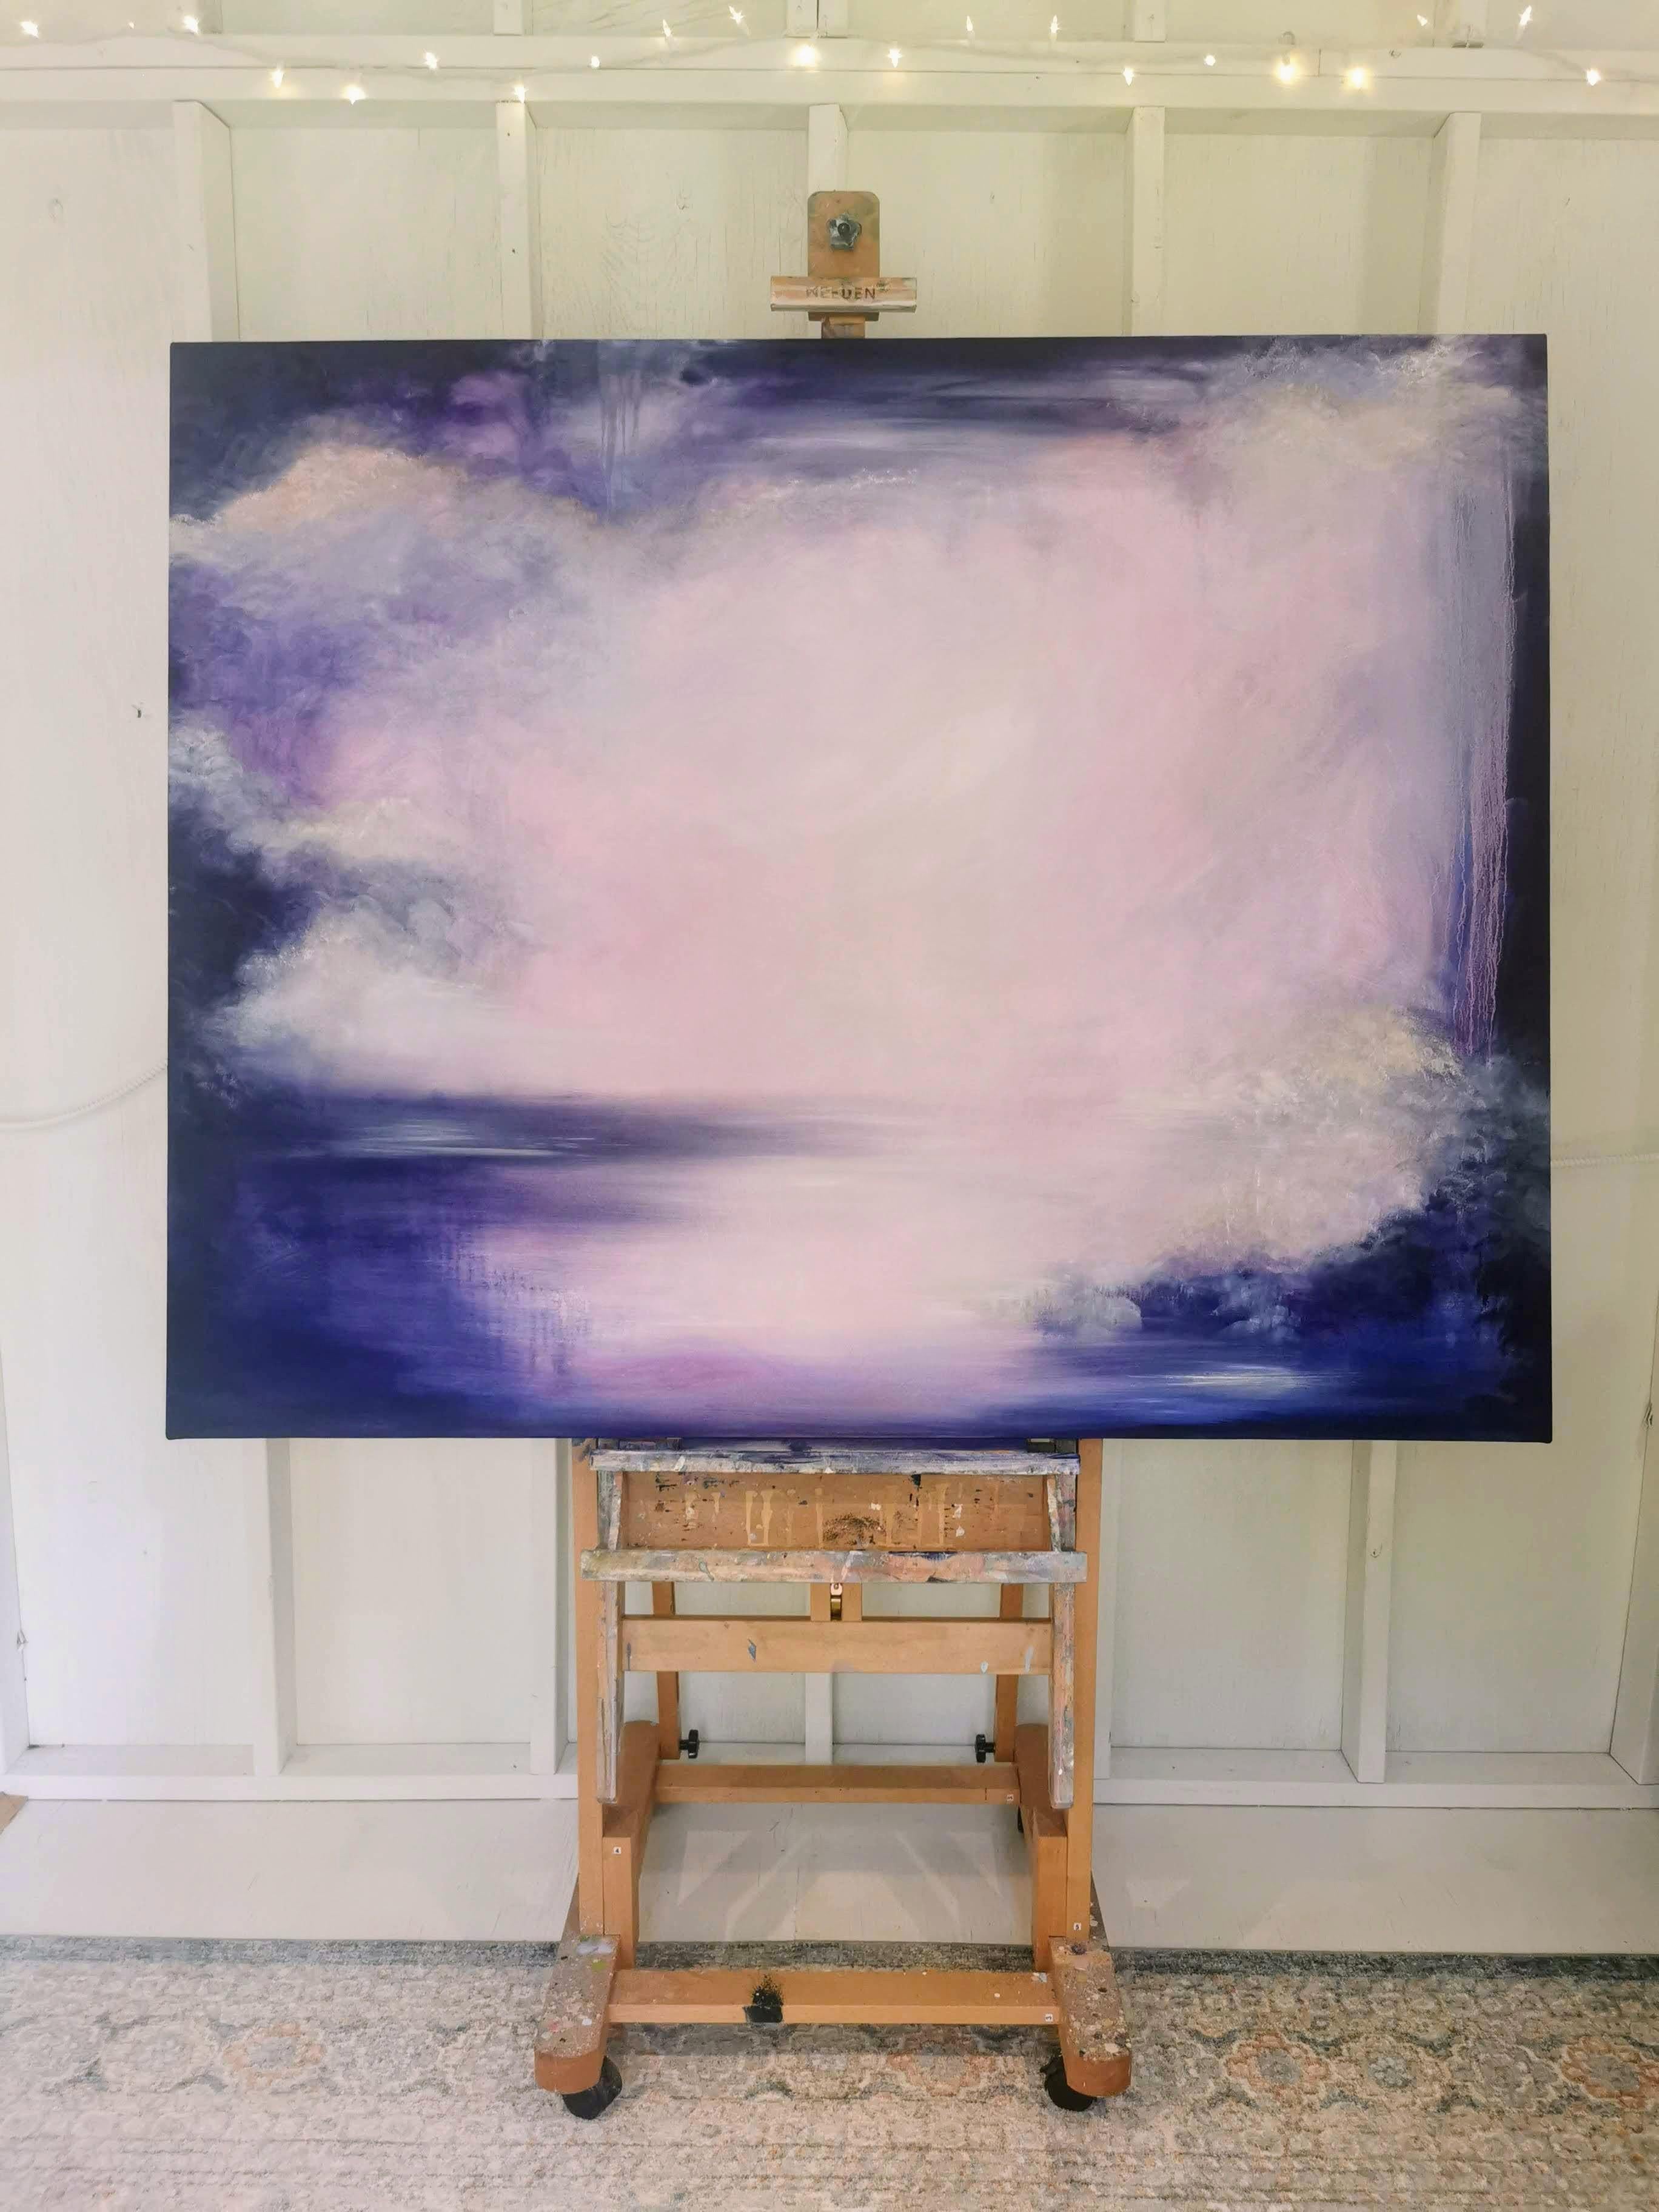 Violet night of the soul - Large violet abstract landscape painting - Abstract Impressionist Painting by Jennifer L. Baker